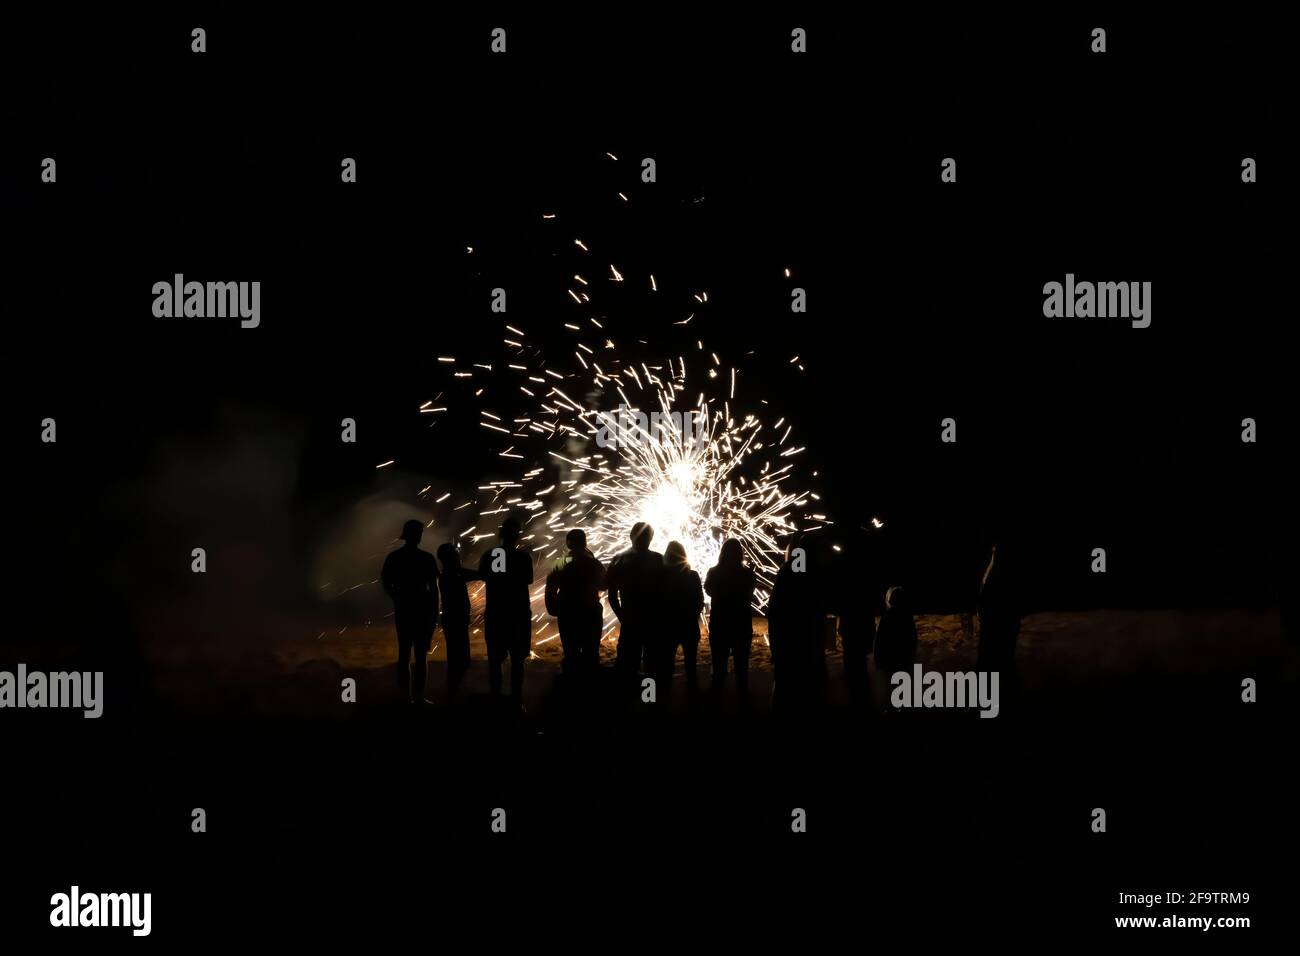 Group of people with backs turned in silhouette watch fireworks explode on beach at night. Stock Photo